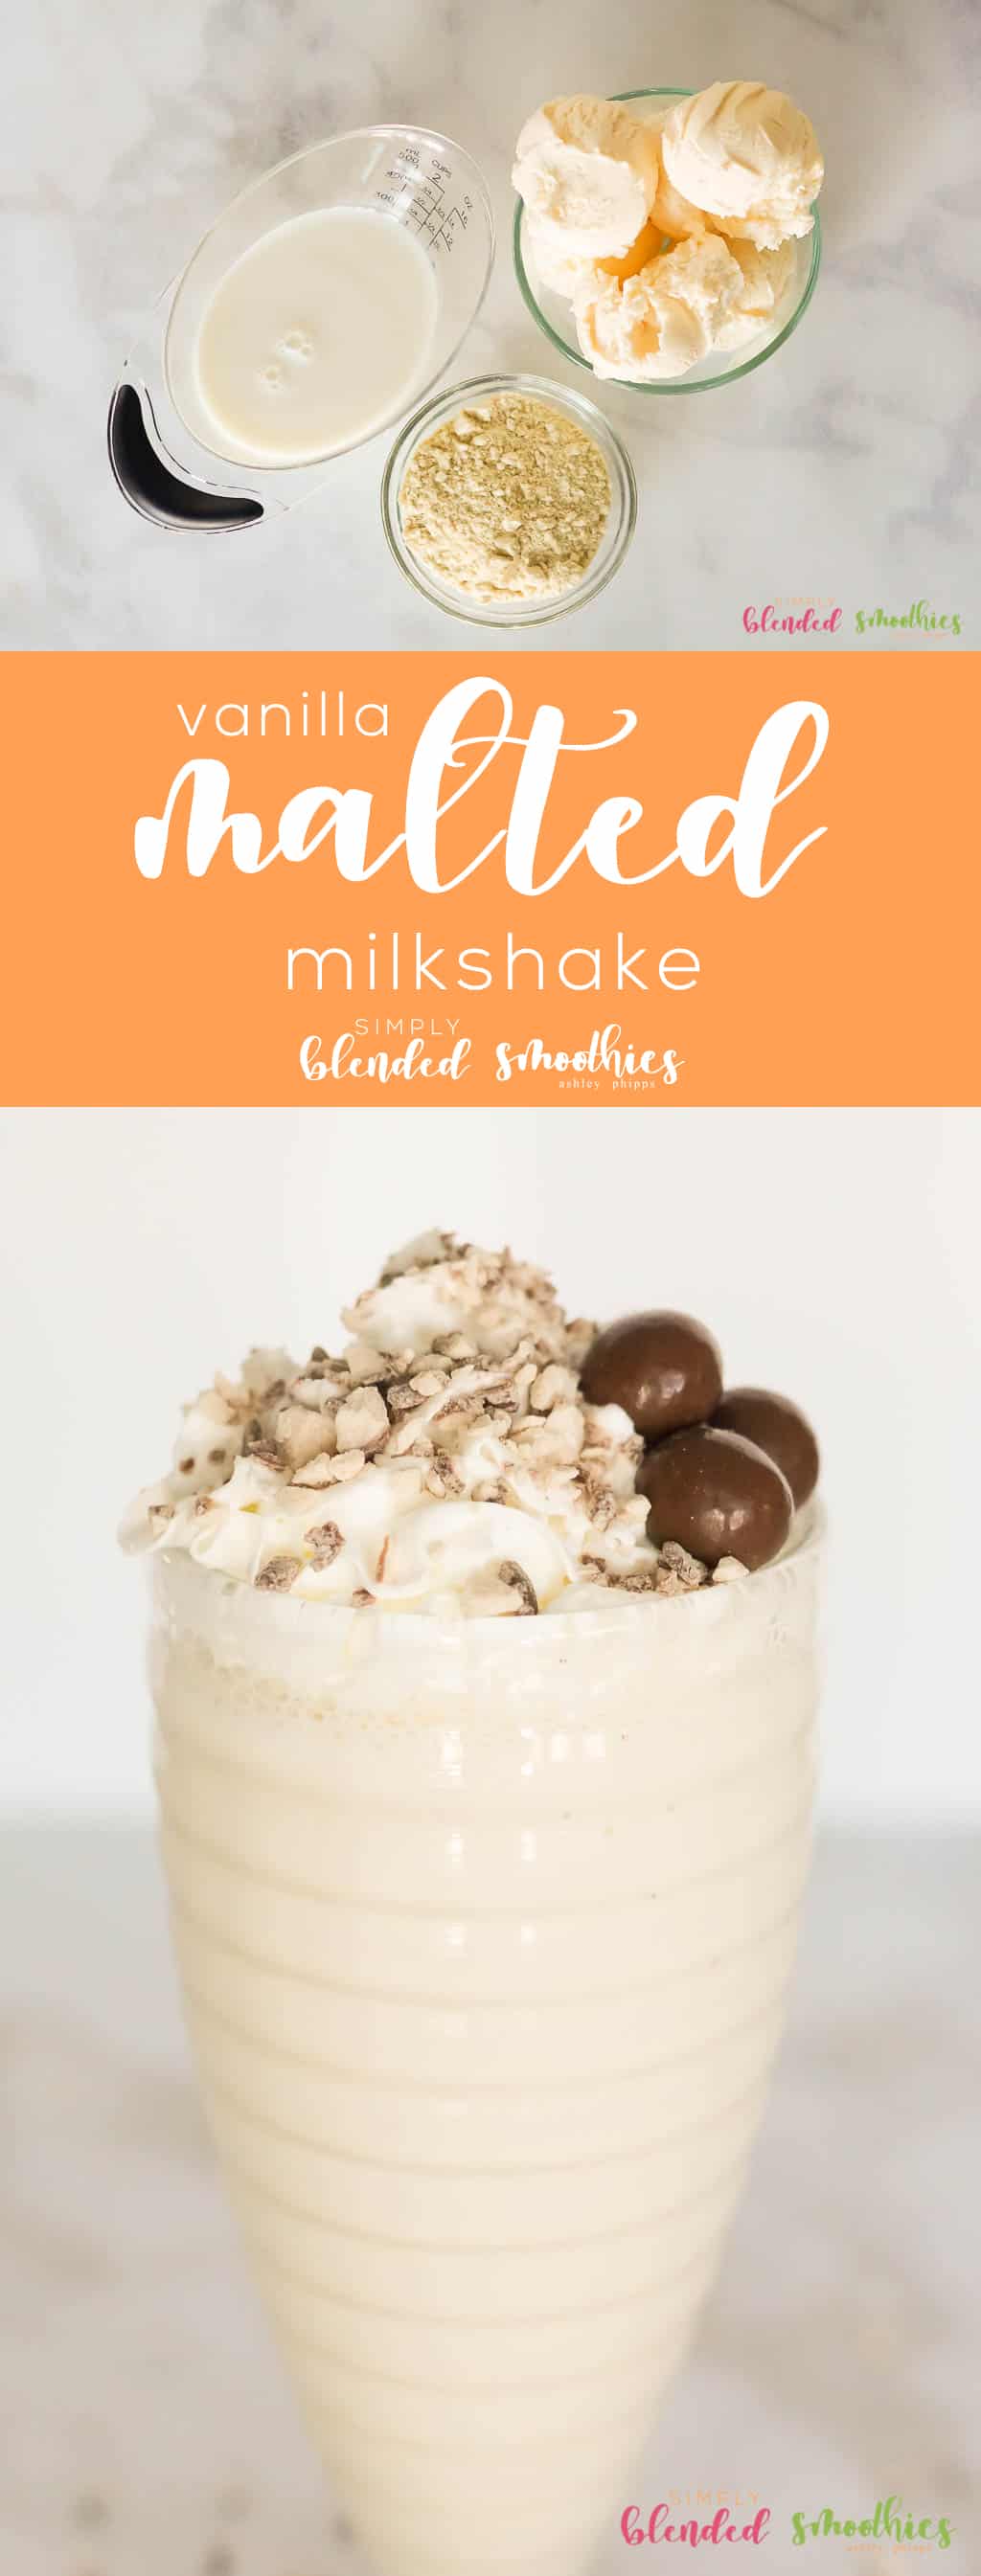 Vanilla Malted Milkshake - This Delicious And Easy To Make Malted Milkshake Recipe Is A Delicious And Rich Flavored Milkshake Perfect For A Treat Any Time Or For A Yummy Dessert